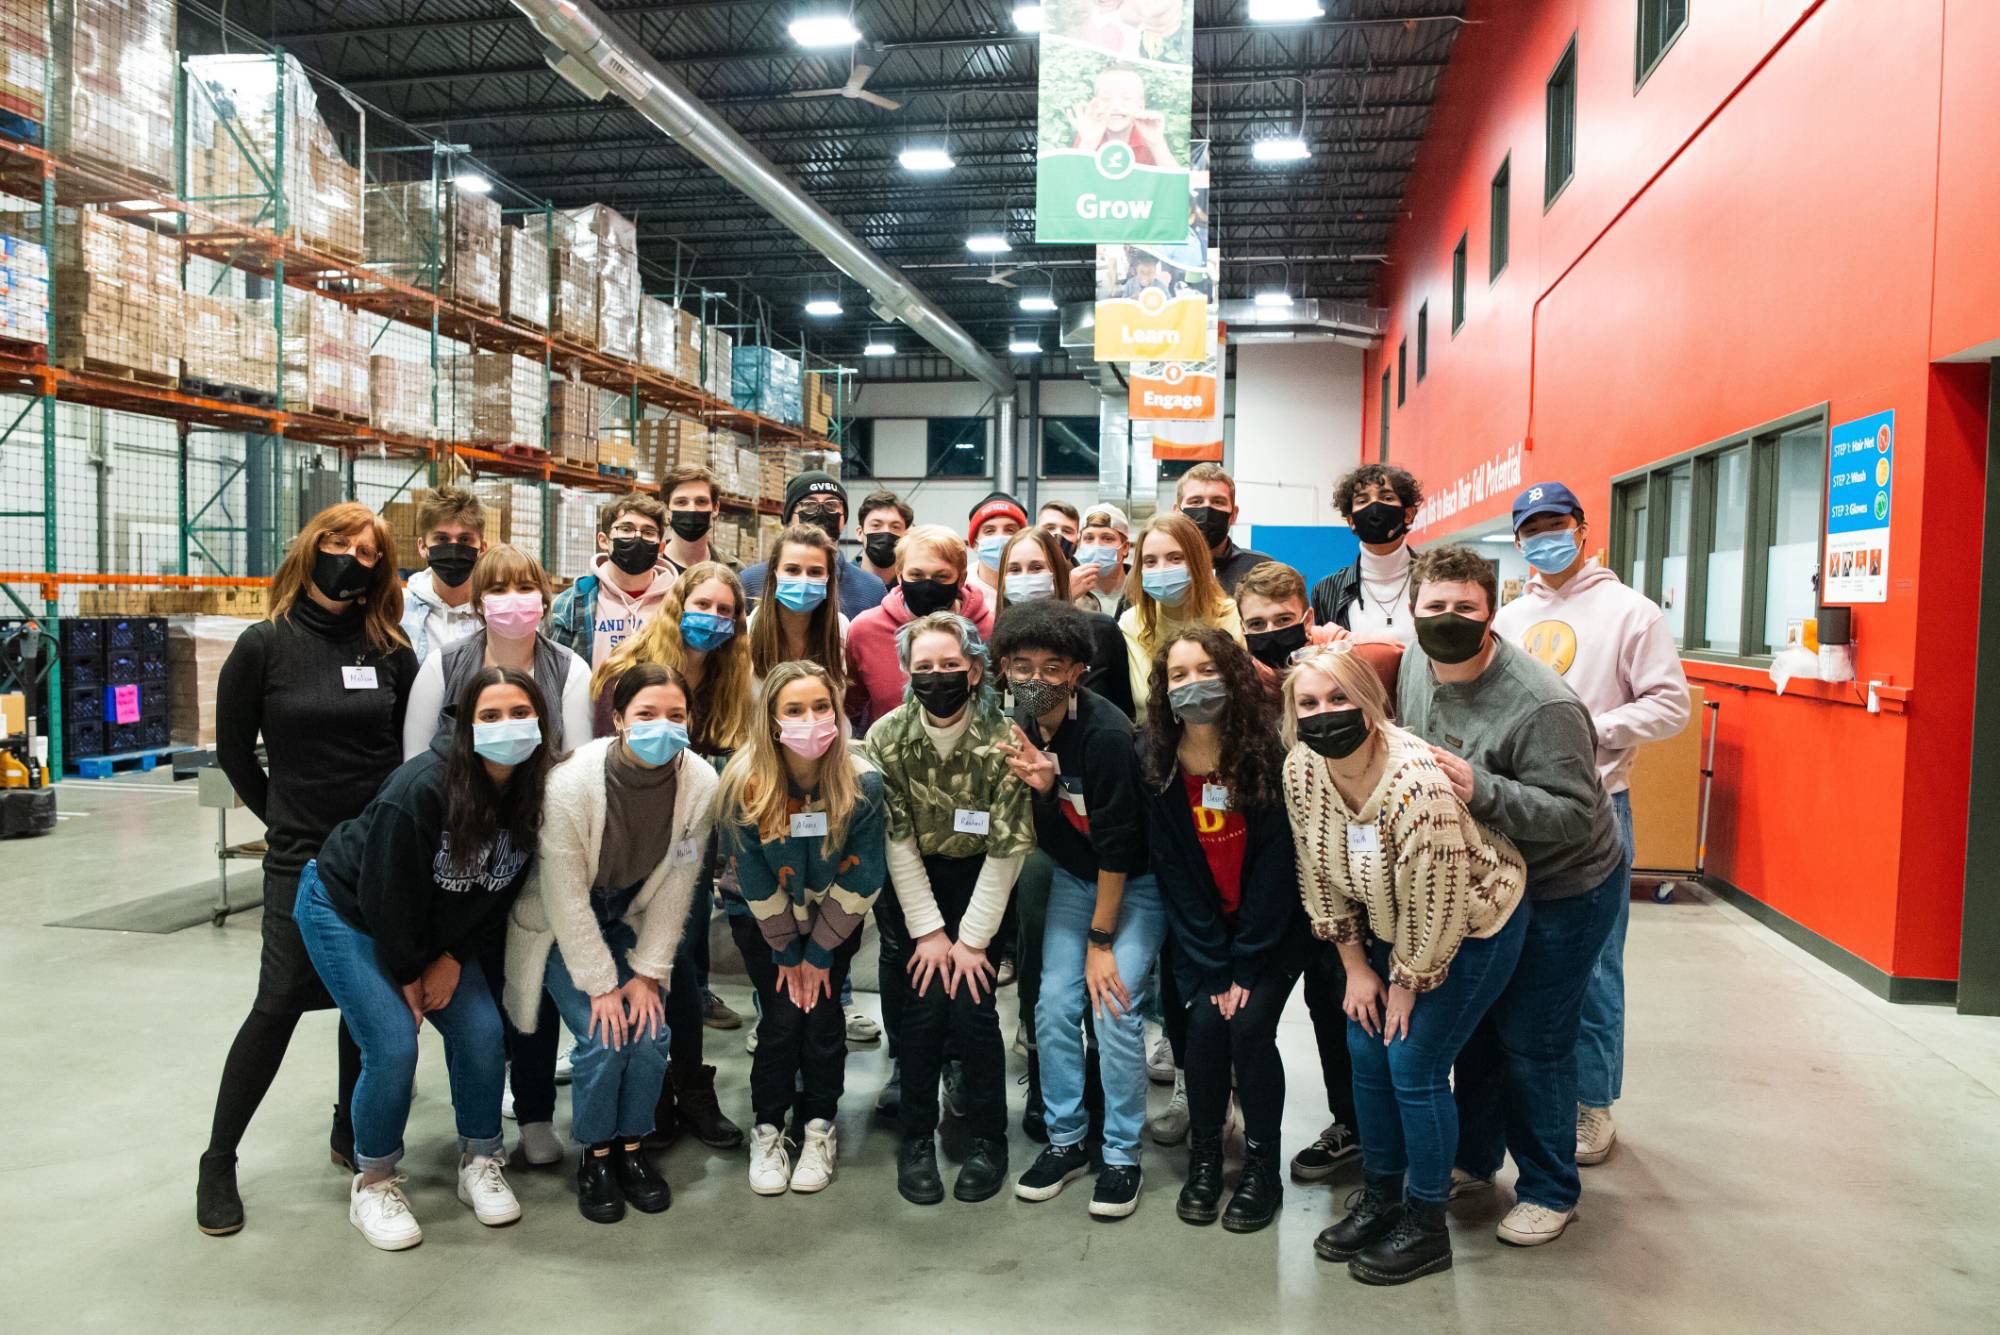 Students participate in service project at Kids Food Basket in Grand Rapids